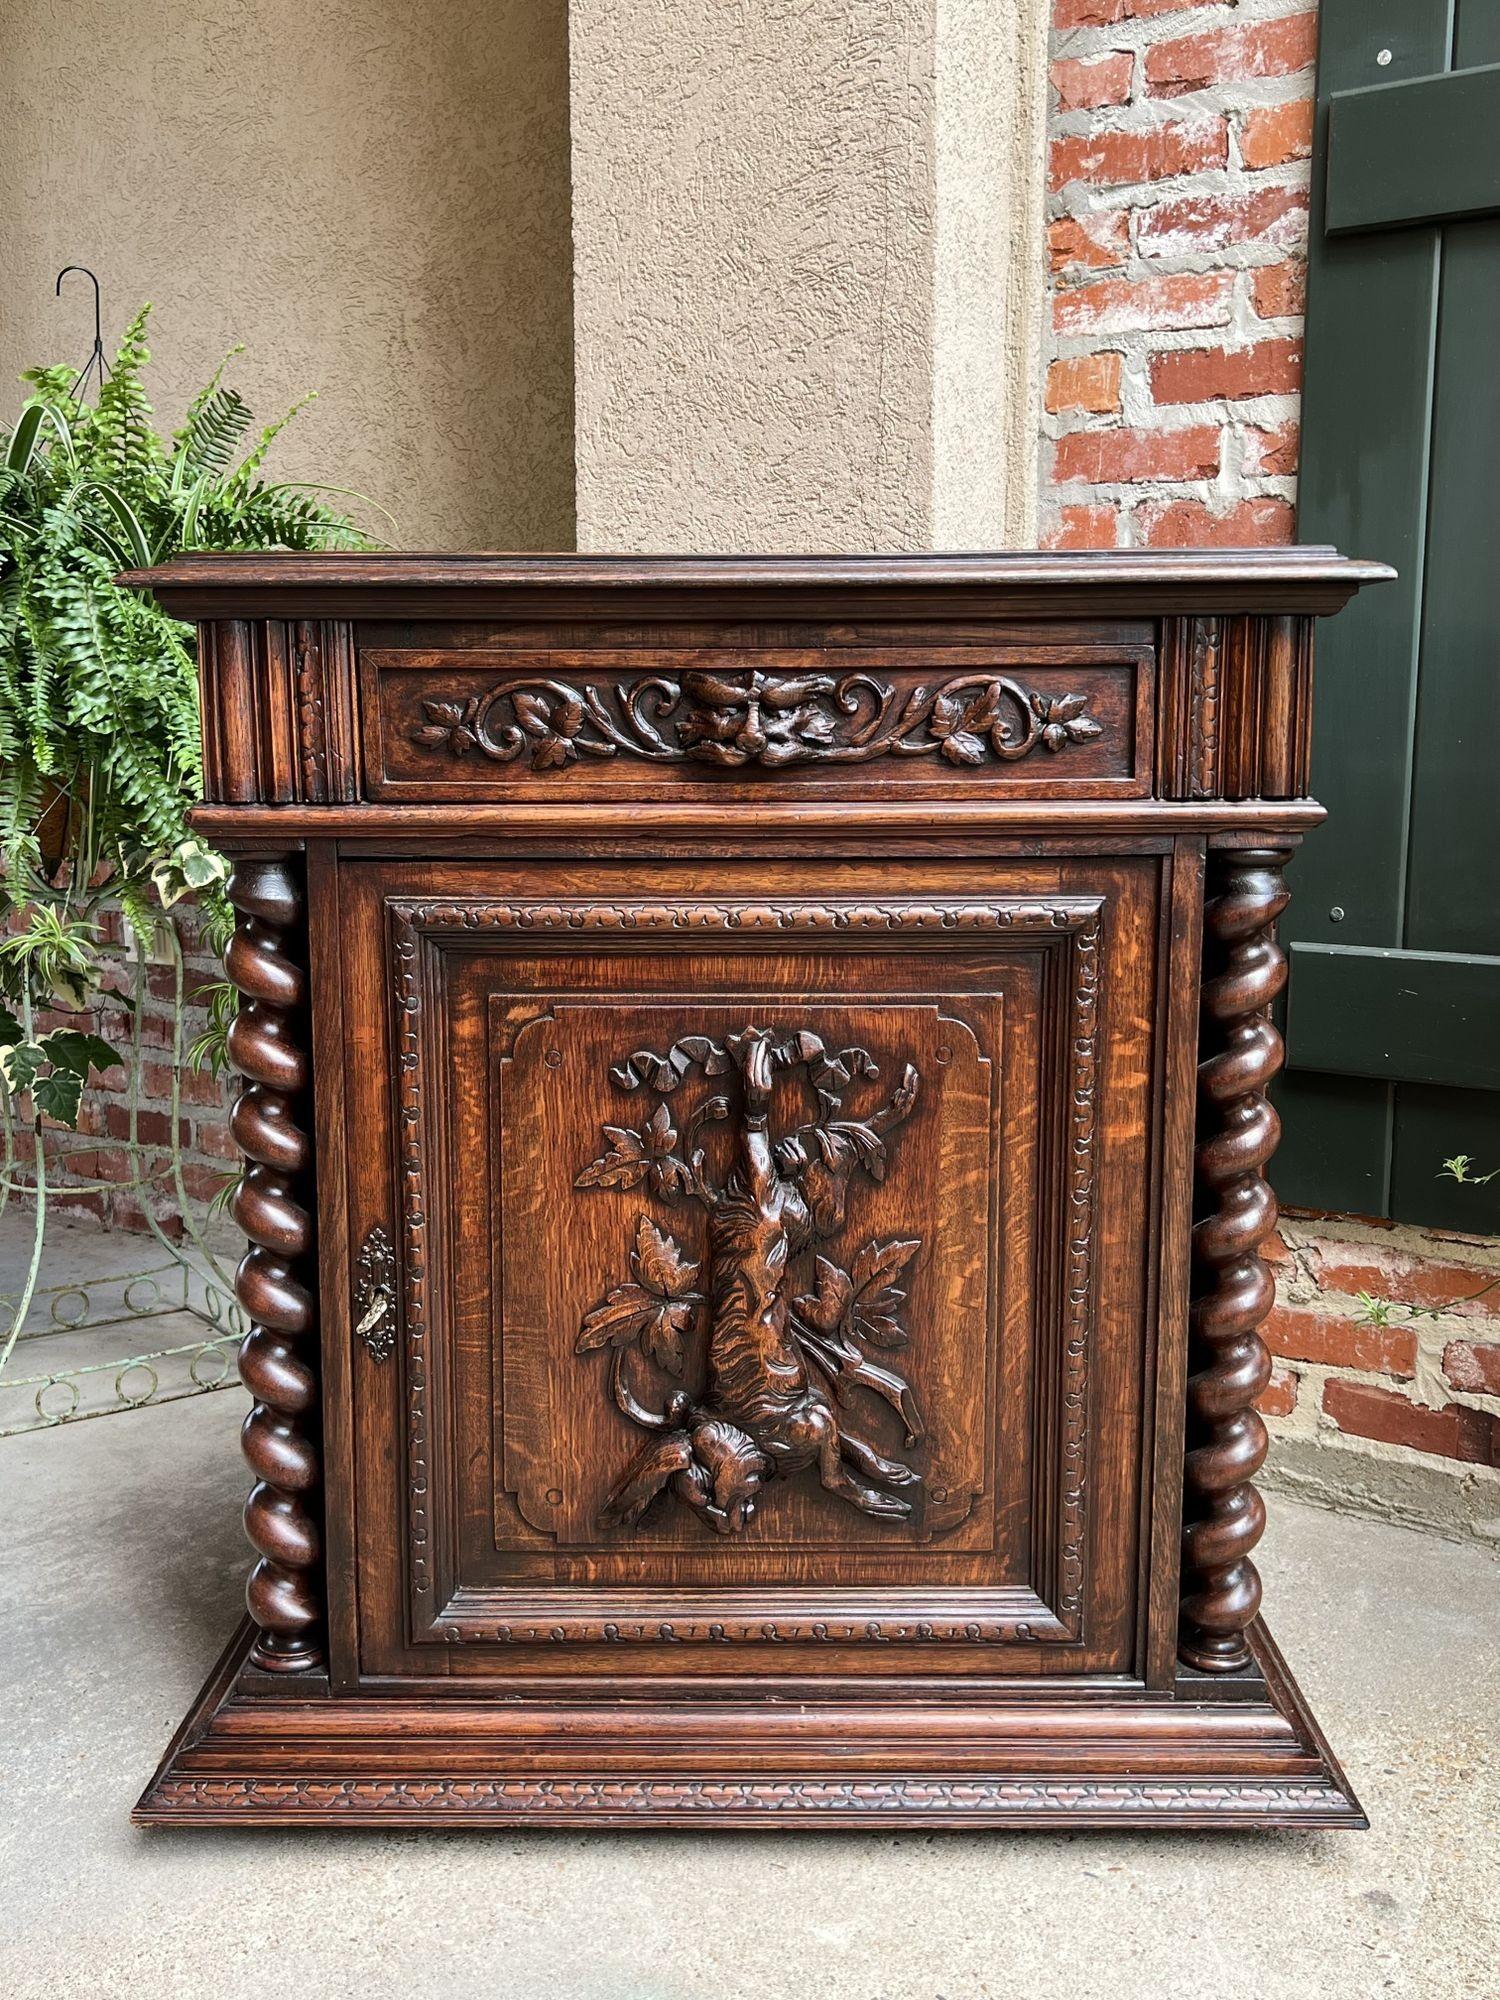 19th century French Carved Oak Hunt Cabinet Barley Twist Black Forest Wine Bar.
 
Directly imported from France, a beautifully hand carved 19th century French confiturier cabinet, in a versatile size, perfect for placement in any room and a customer